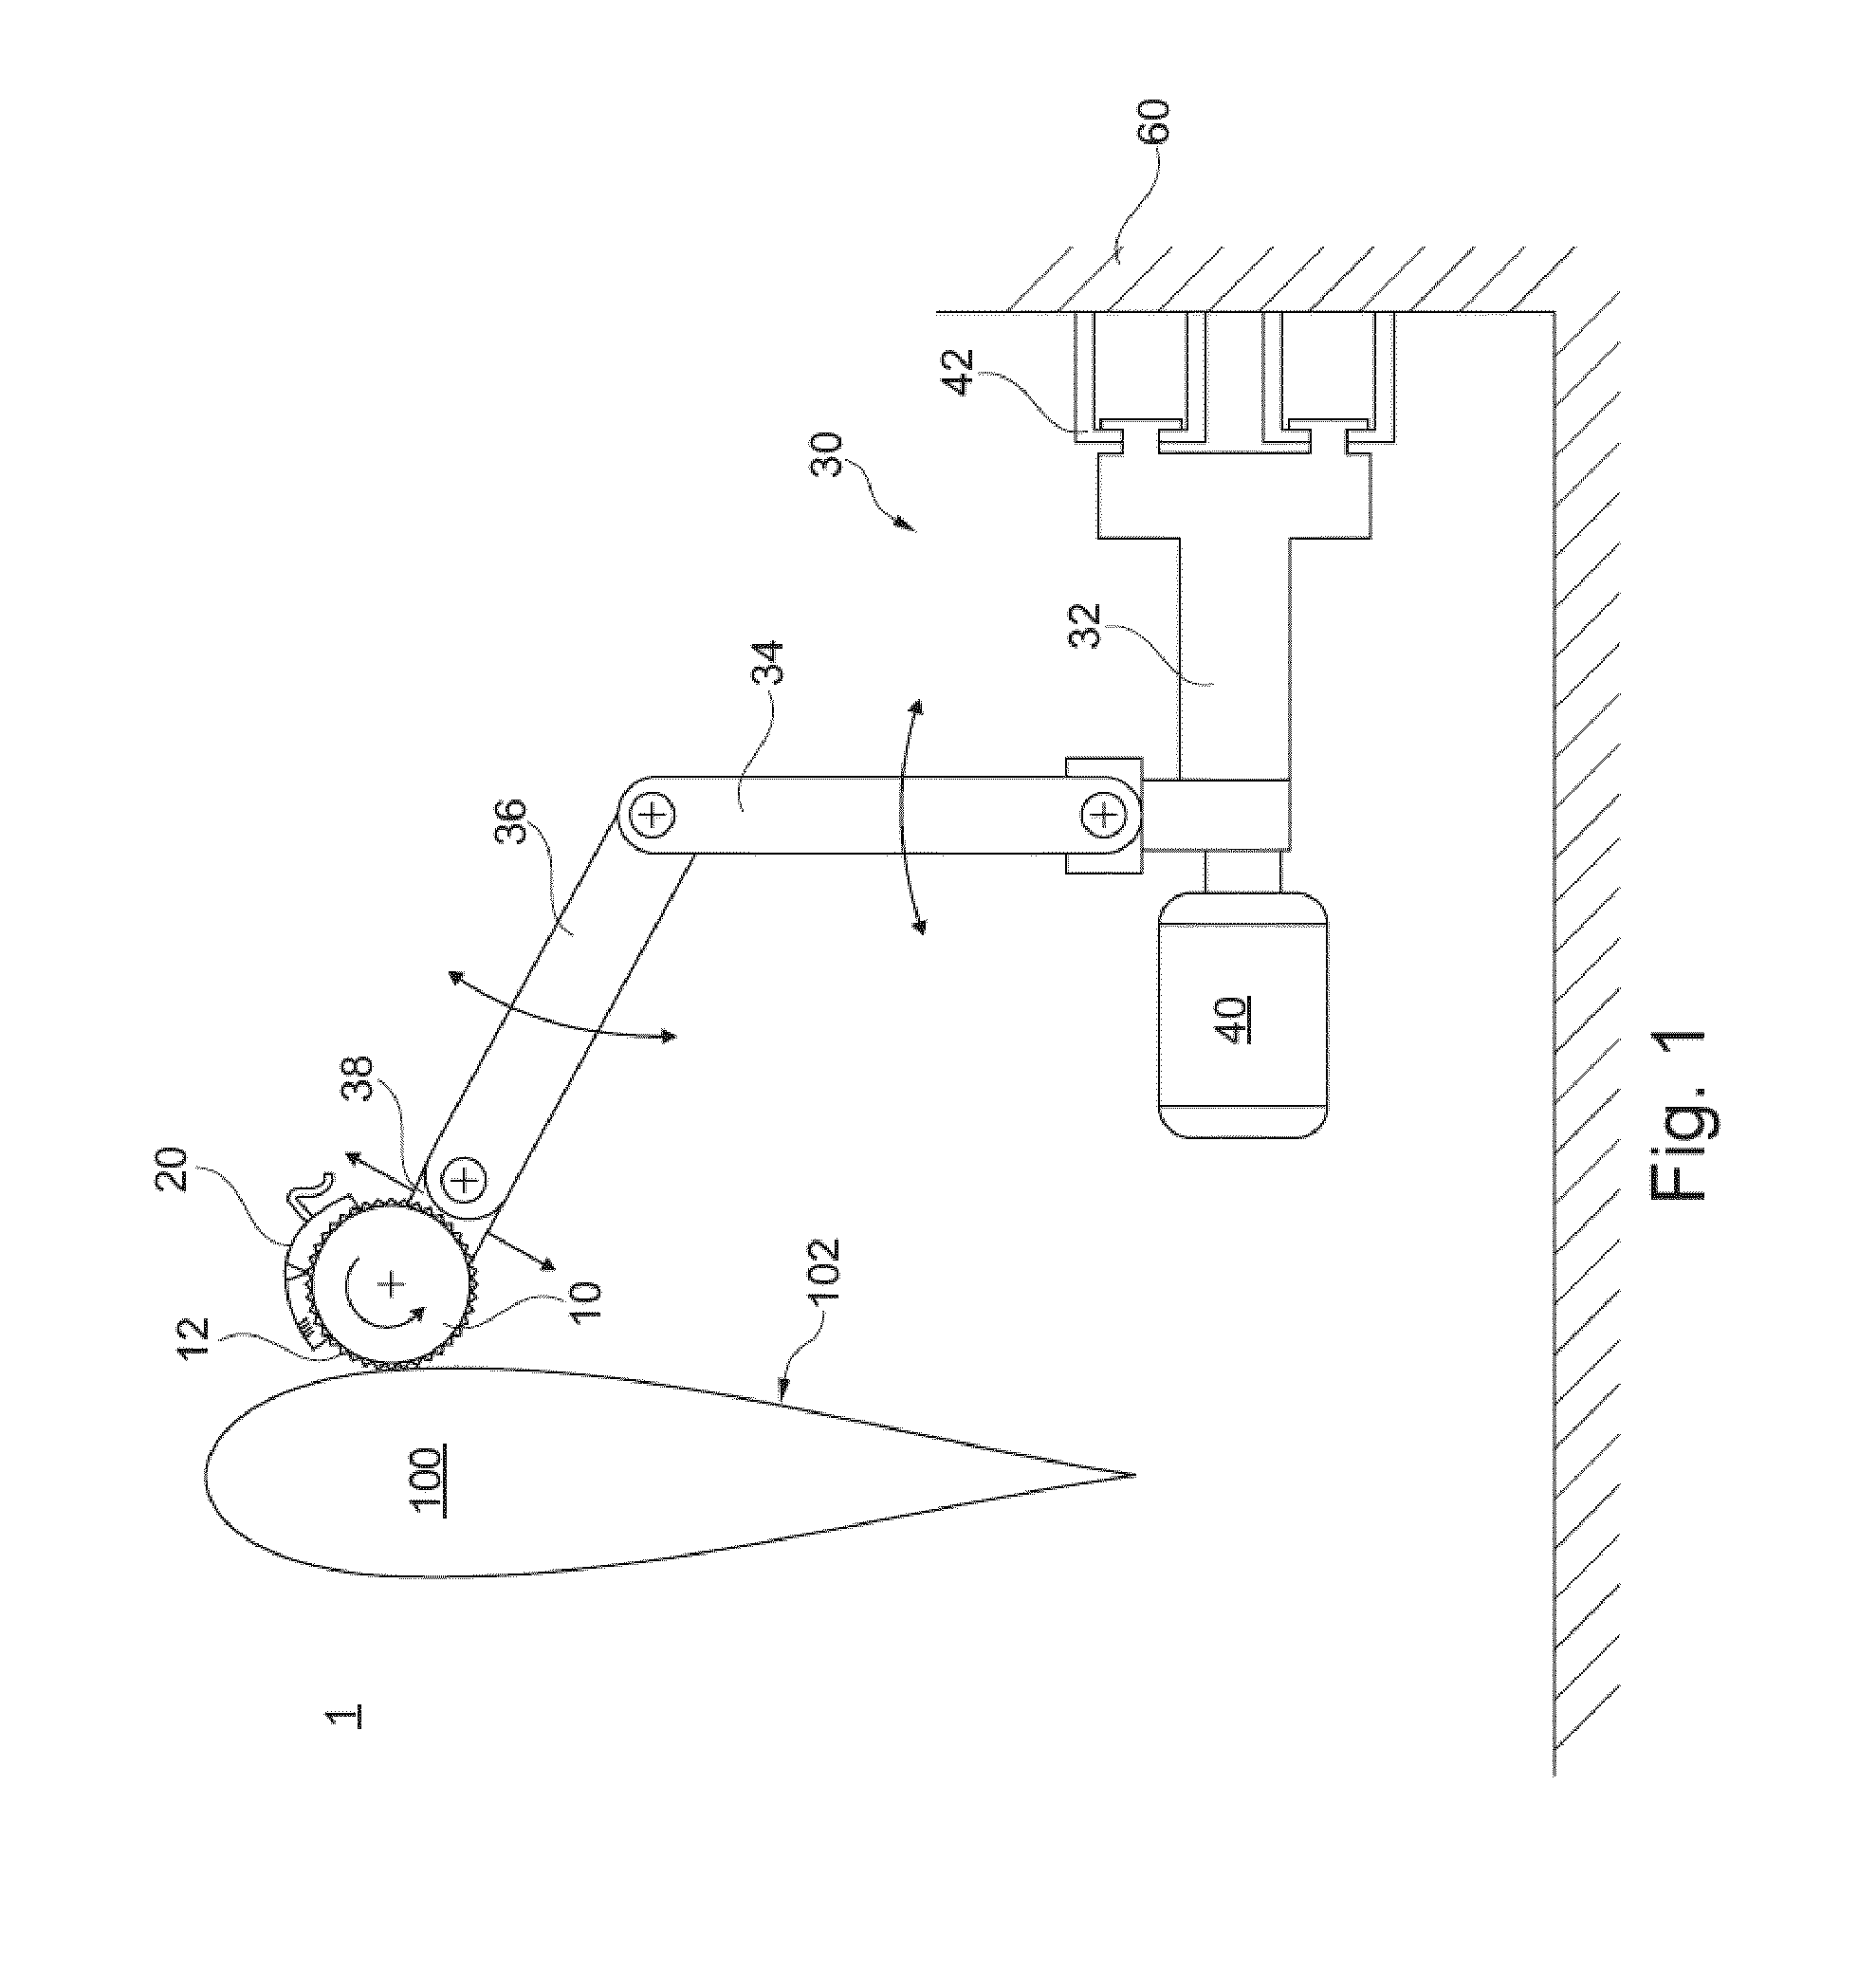 Grinding device for machine based grinding of rotor blades for wind energy systems